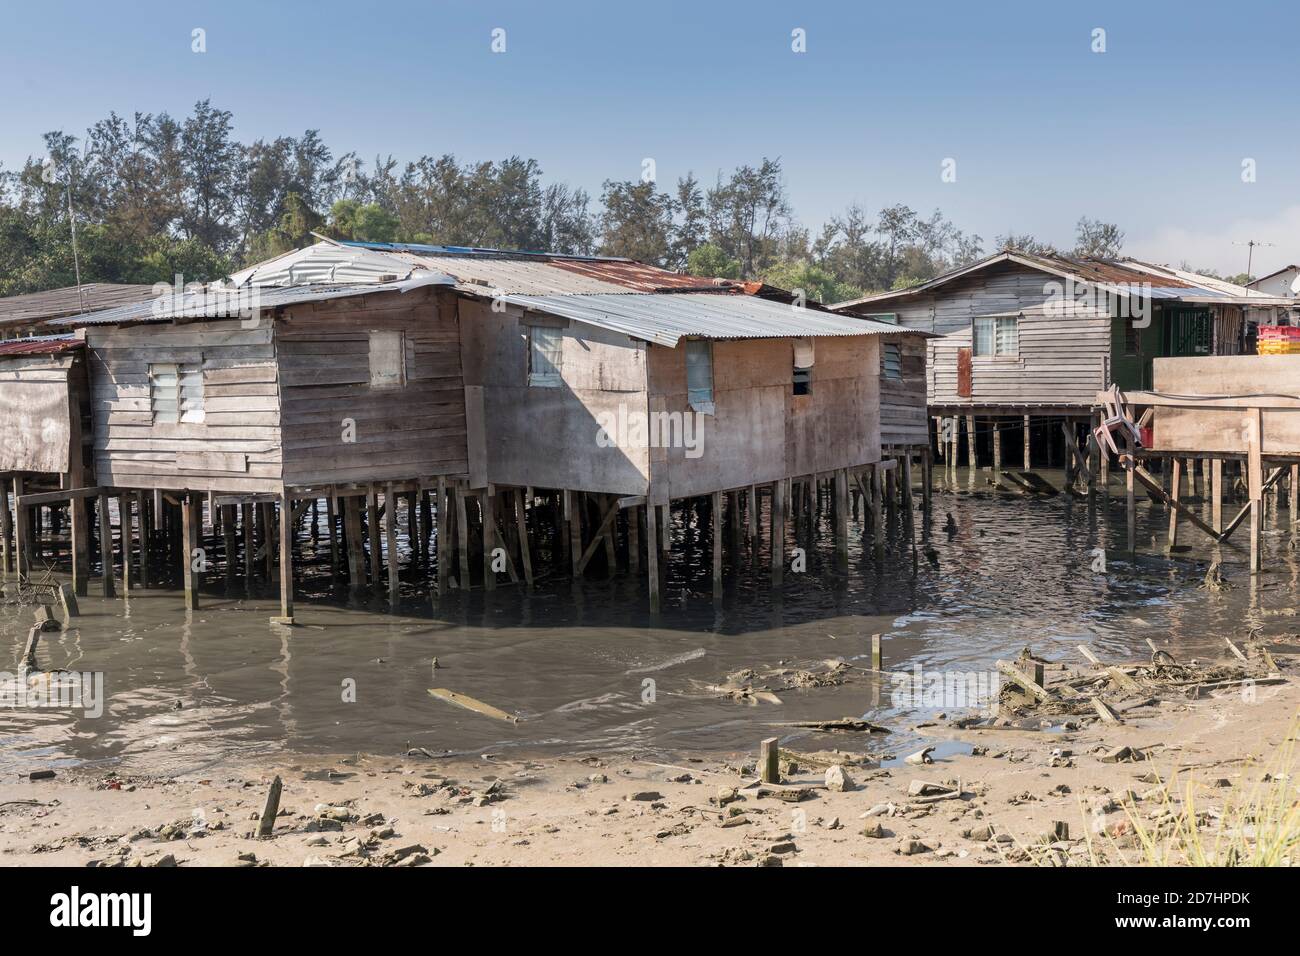 Houses and shops on pilings in river, Miri, Malaysia Stock Photo